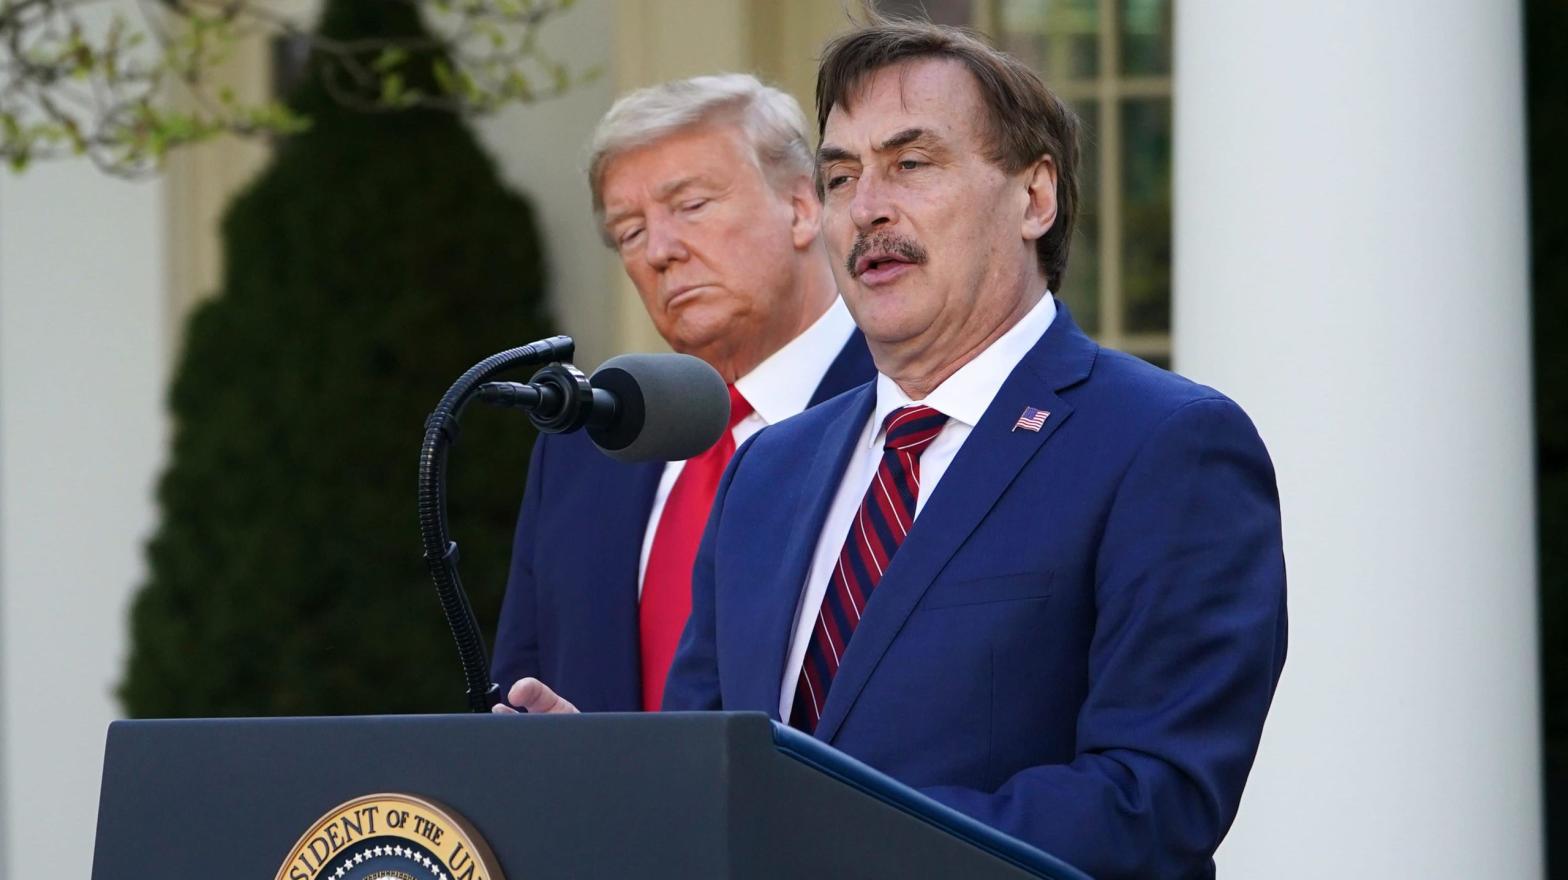 MyPillow CEO Mike Lindell. (Photo: Mandel Ngan/AFP, Getty Images)